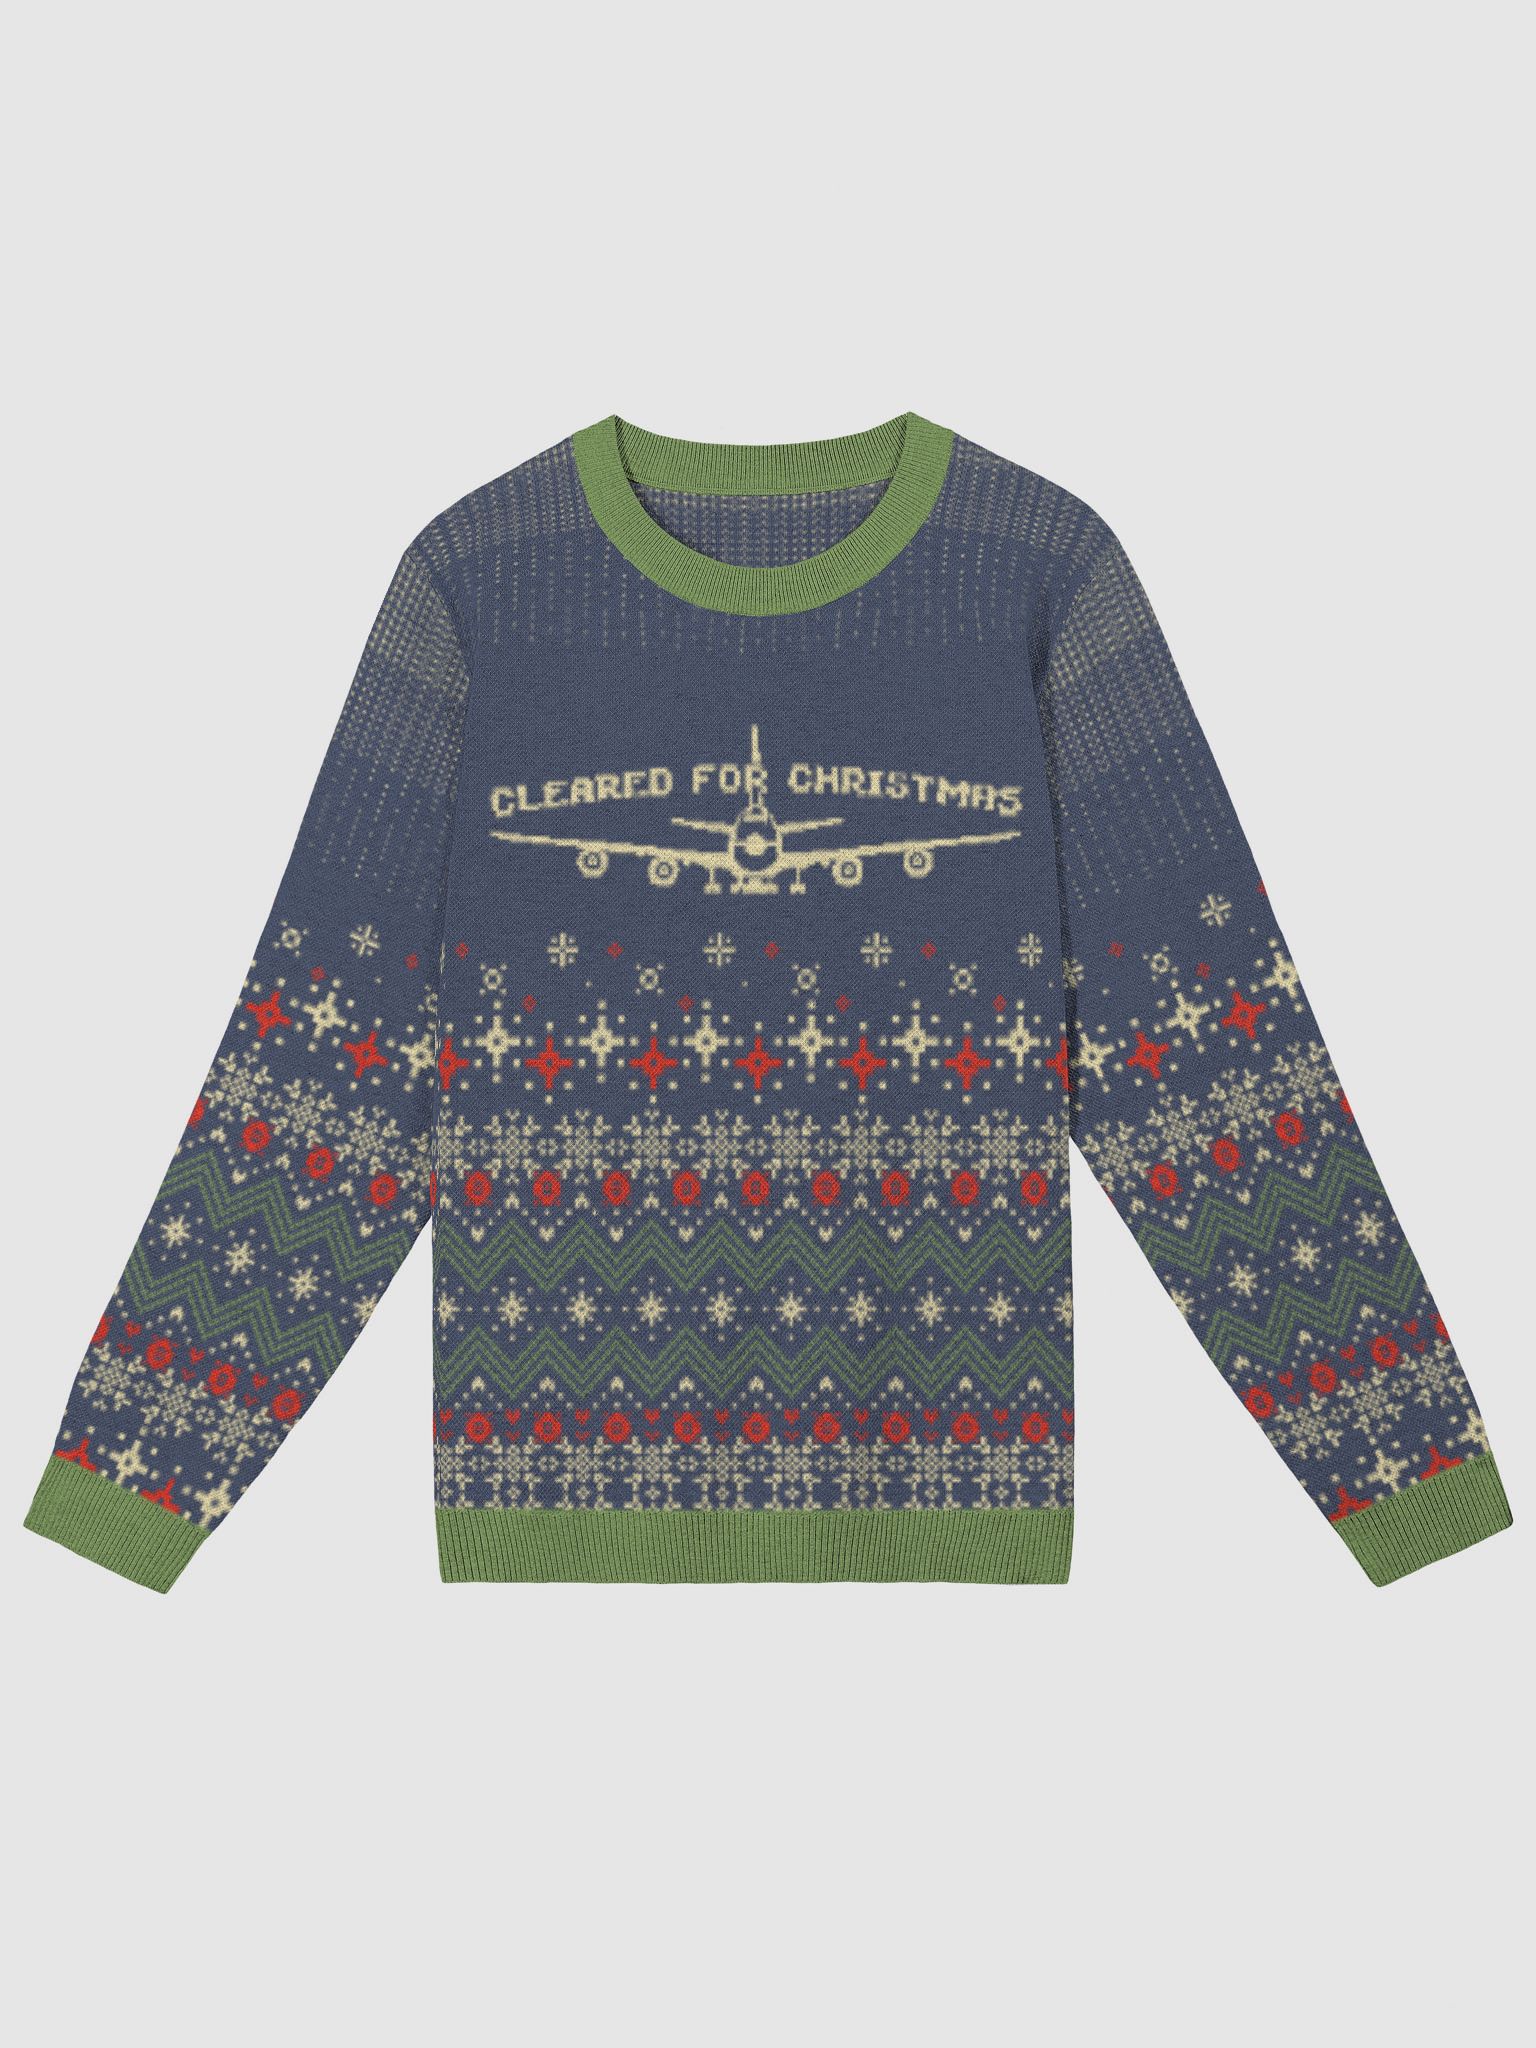 Aviation Christmas Sweater | The Aviation Central